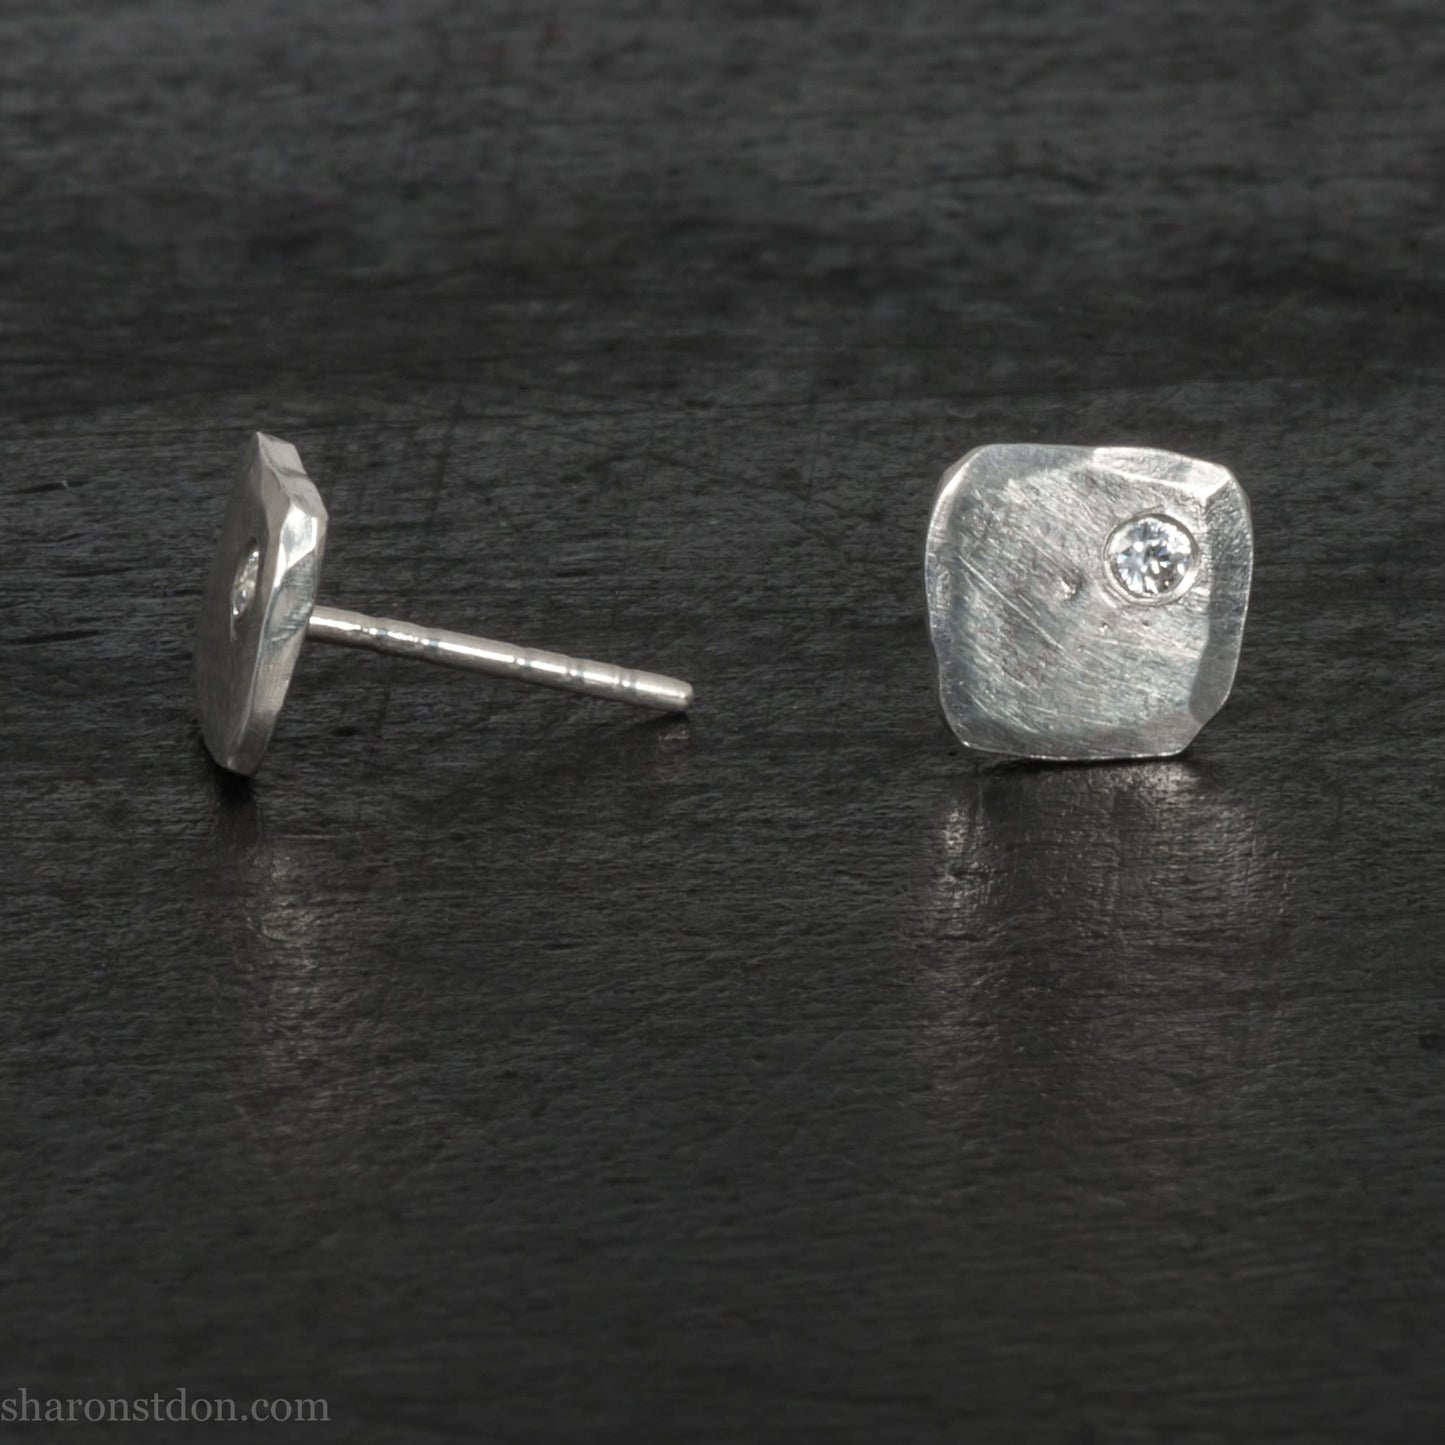 7mm square, handmade 925 sterling silver stud earrings with a Canadian diamond set in the corner. Handmade by Sharon SaintDon in North America with Canadamark diamonds.